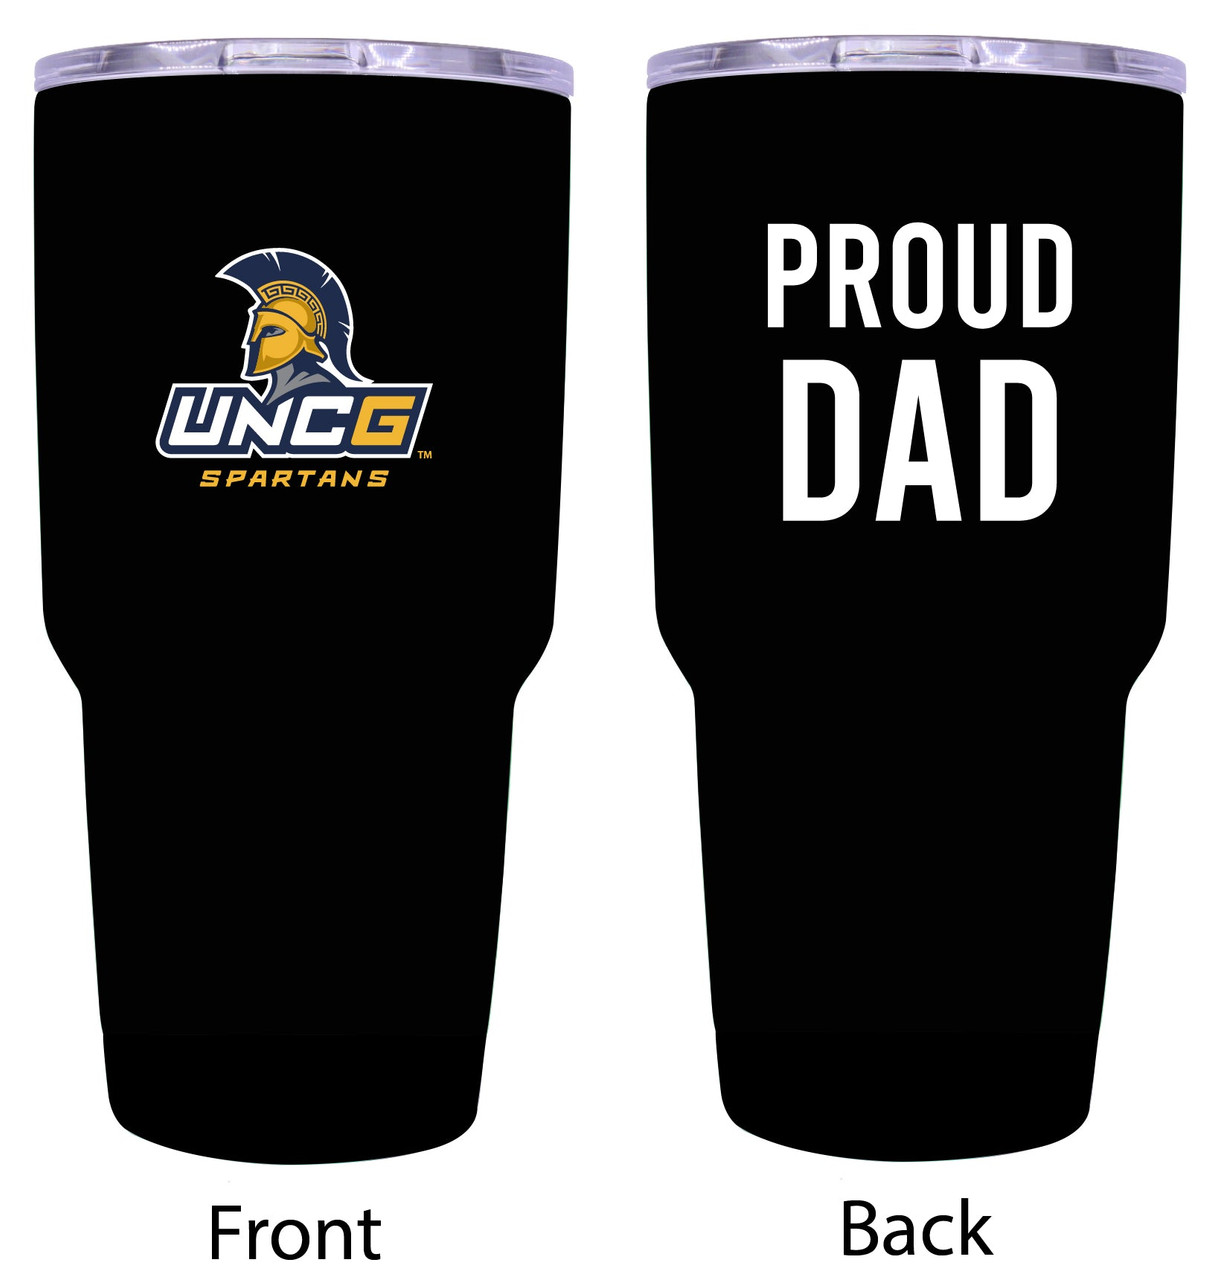 North Carolina Greensboro Spartans Proud Dad 24 oz Insulated Stainless Steel Tumblers Black.